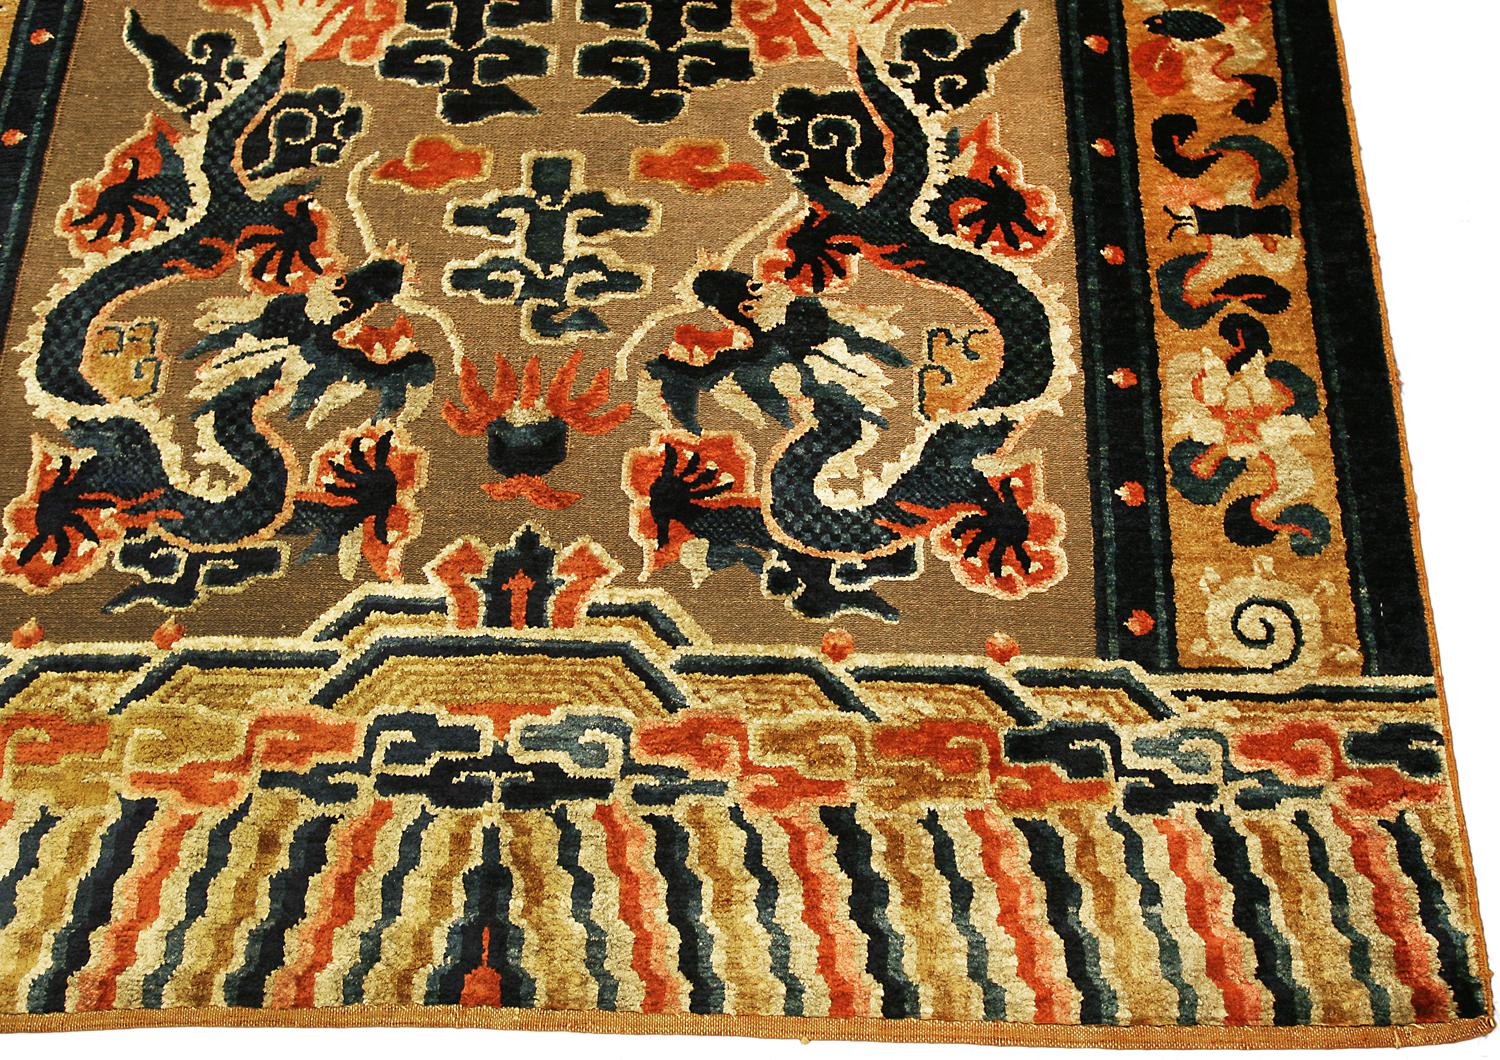 19th Century Ningxia Brown Metal-Thread Imperial Palace Souf Chinese Rug For Sale 2